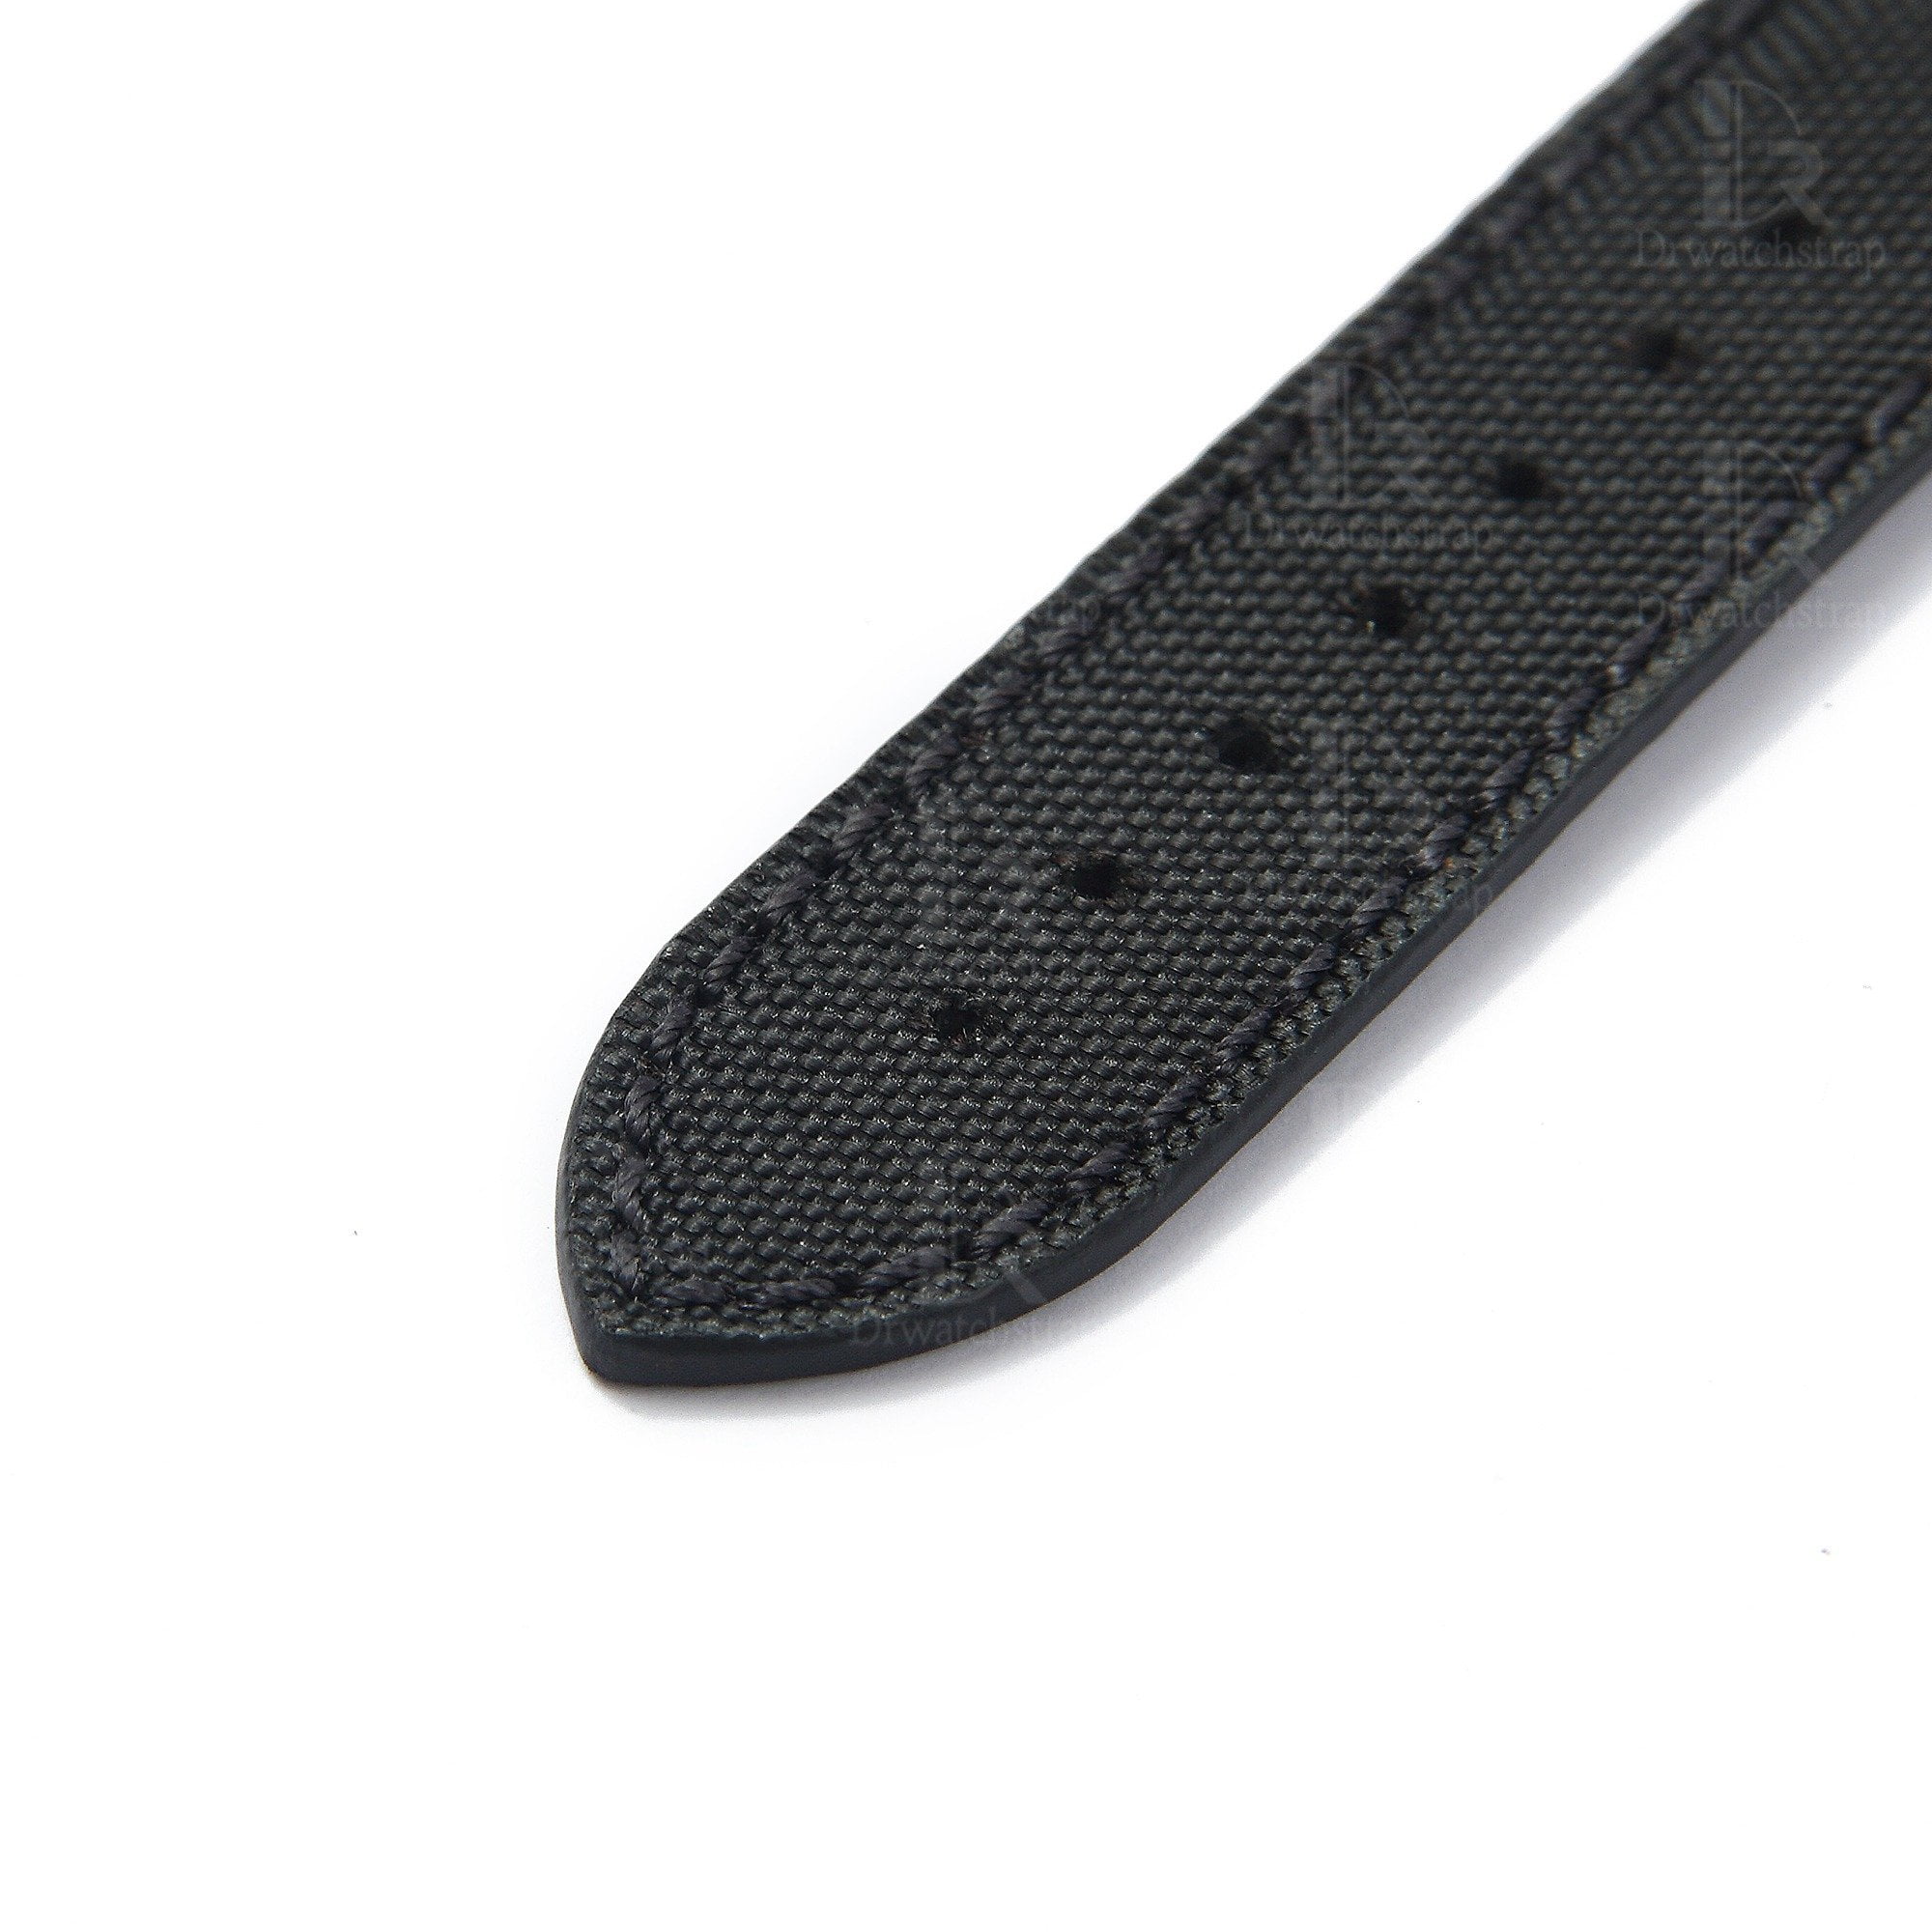 Custom nylon best Omega Speedmaster aftermarket straps 18mm 20mm handmade black canvas - Omega Seamaster watch band replacement online at a discount price aftermarket watch strap